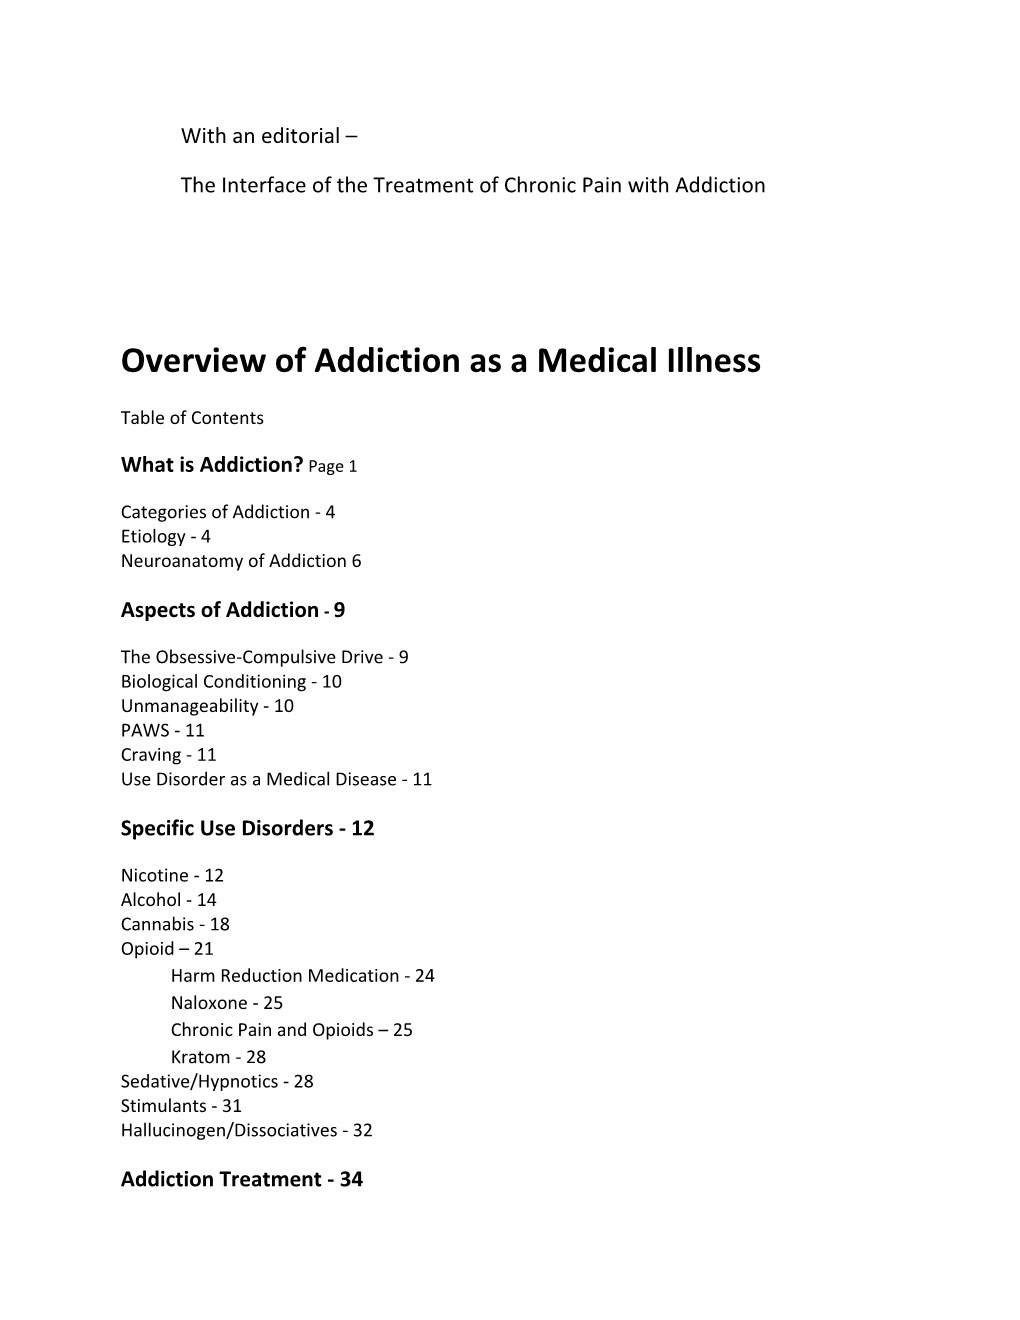 Overview of Addiction